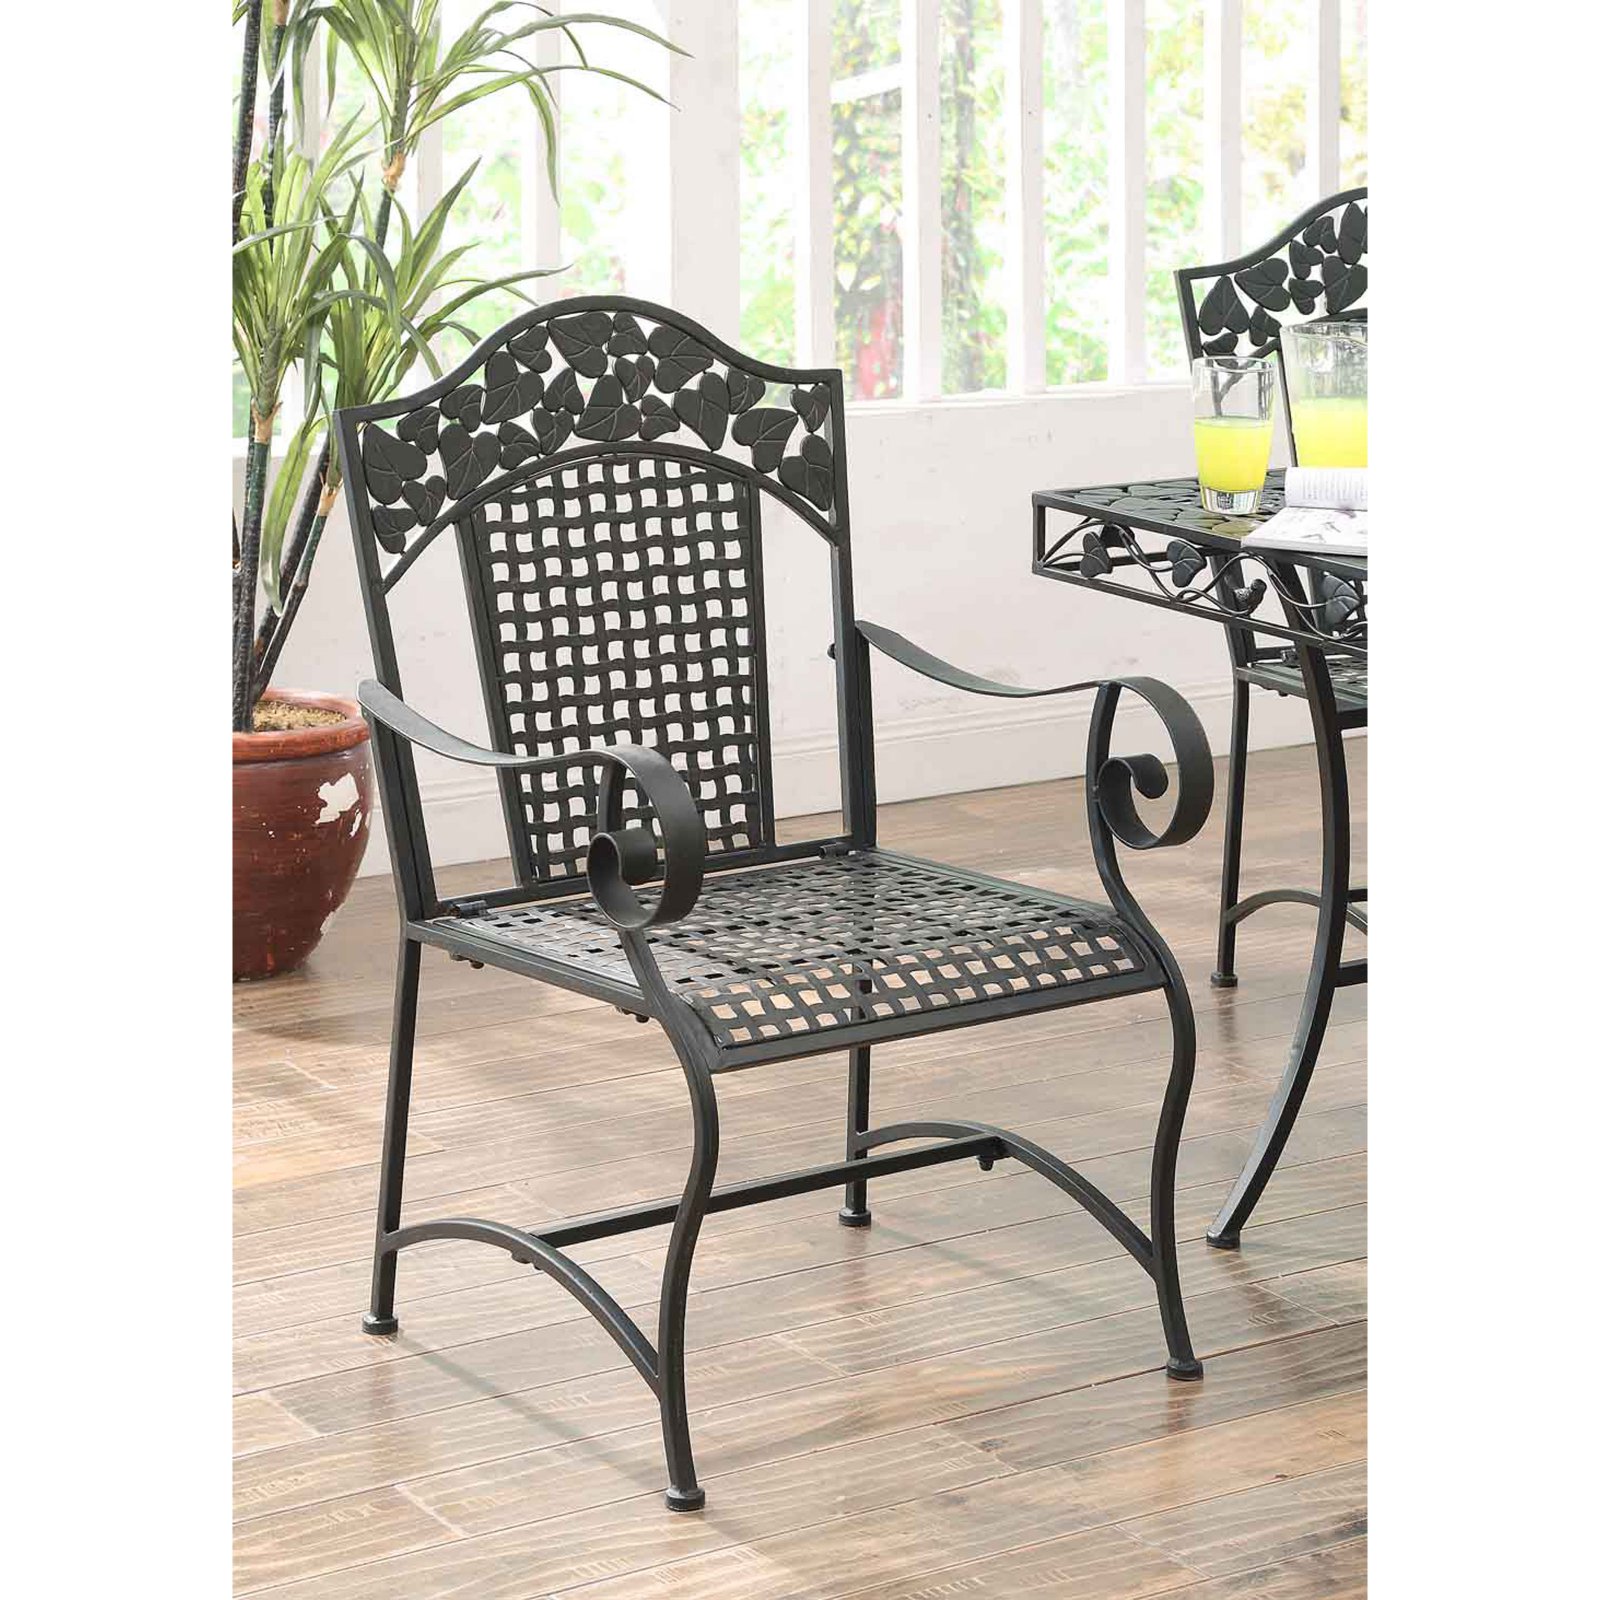 4D Concepts Ivy League Dining Chairs - Set of 2 - image 1 of 2